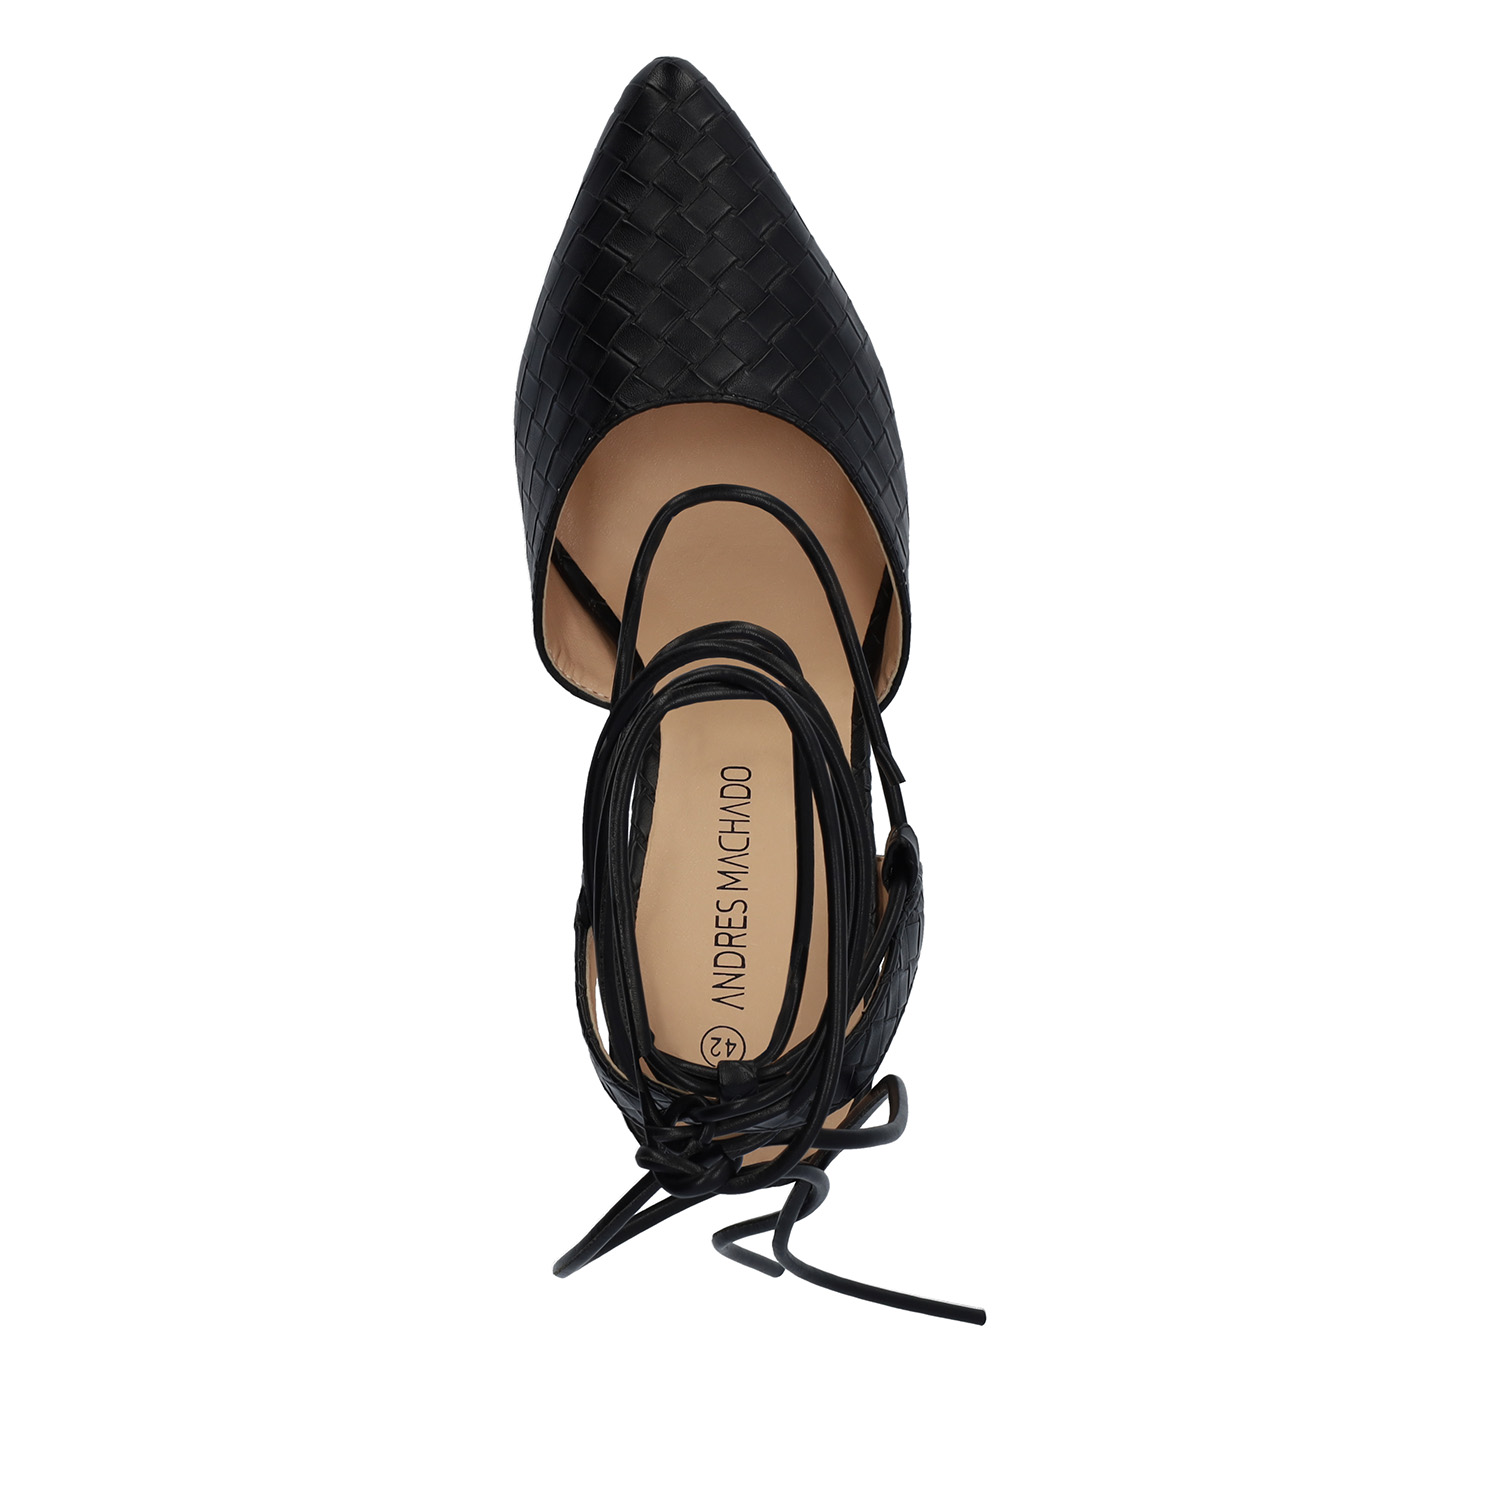 Woven black faux leather heeled shoes 